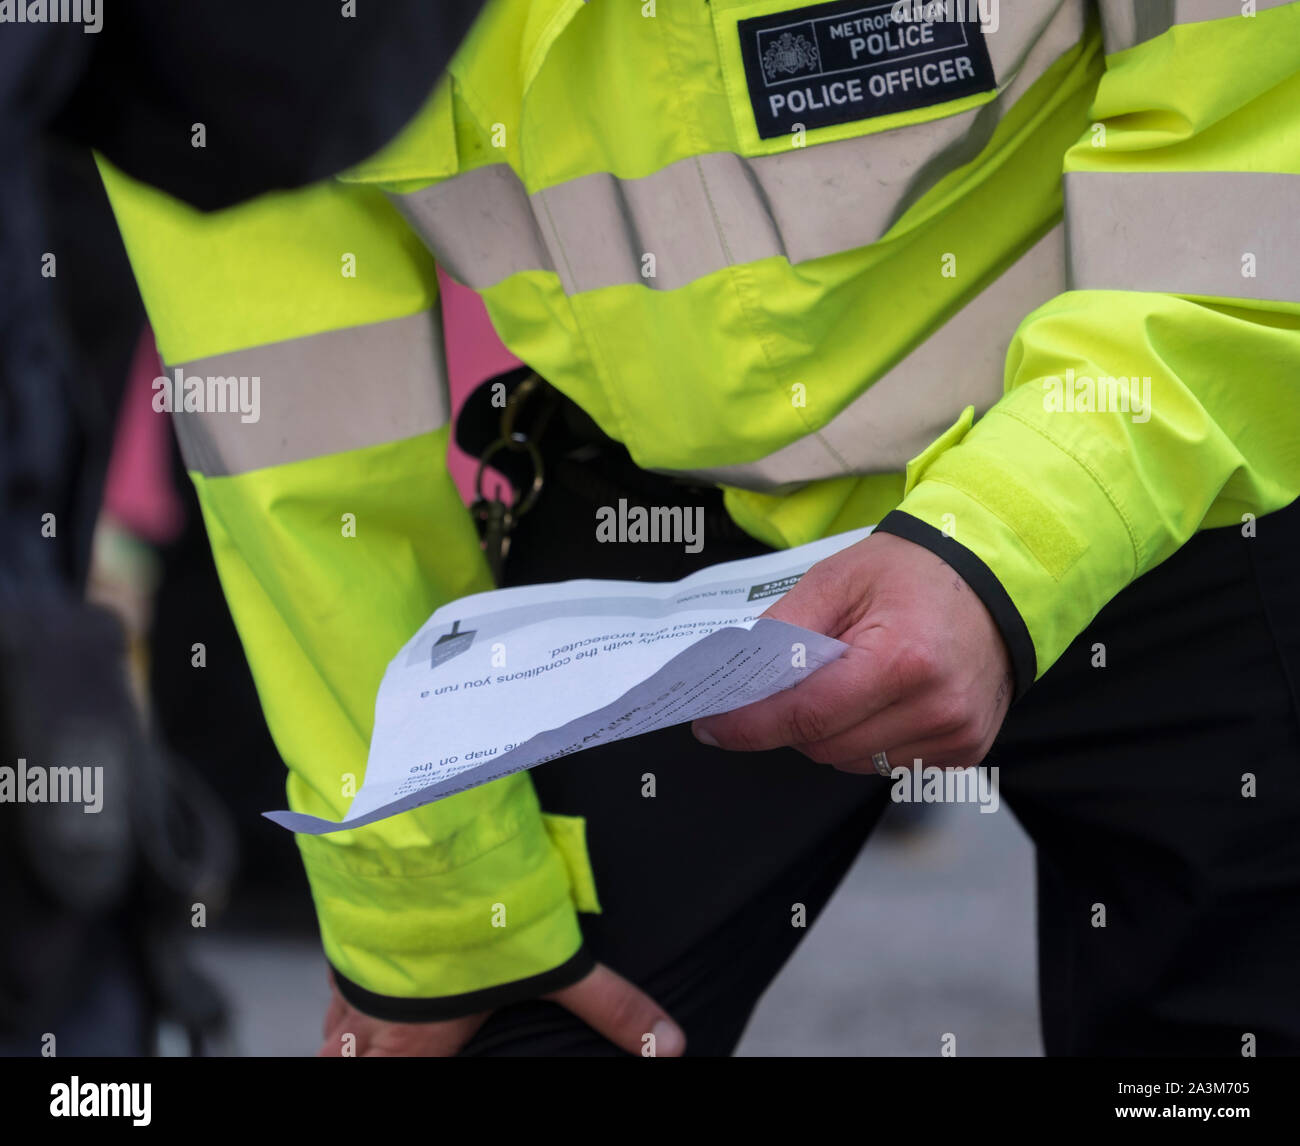 Whitehall, London, UK. 9th October 2019. Large police presence makes arrests and removes Extinction Rebellion activists who have glued themselves to Whitehall. Officer reads a Section 14 Public Order Act notice to two demonstrators on the road. Credit: Malcolm Park/Alamy Live News. Stock Photo